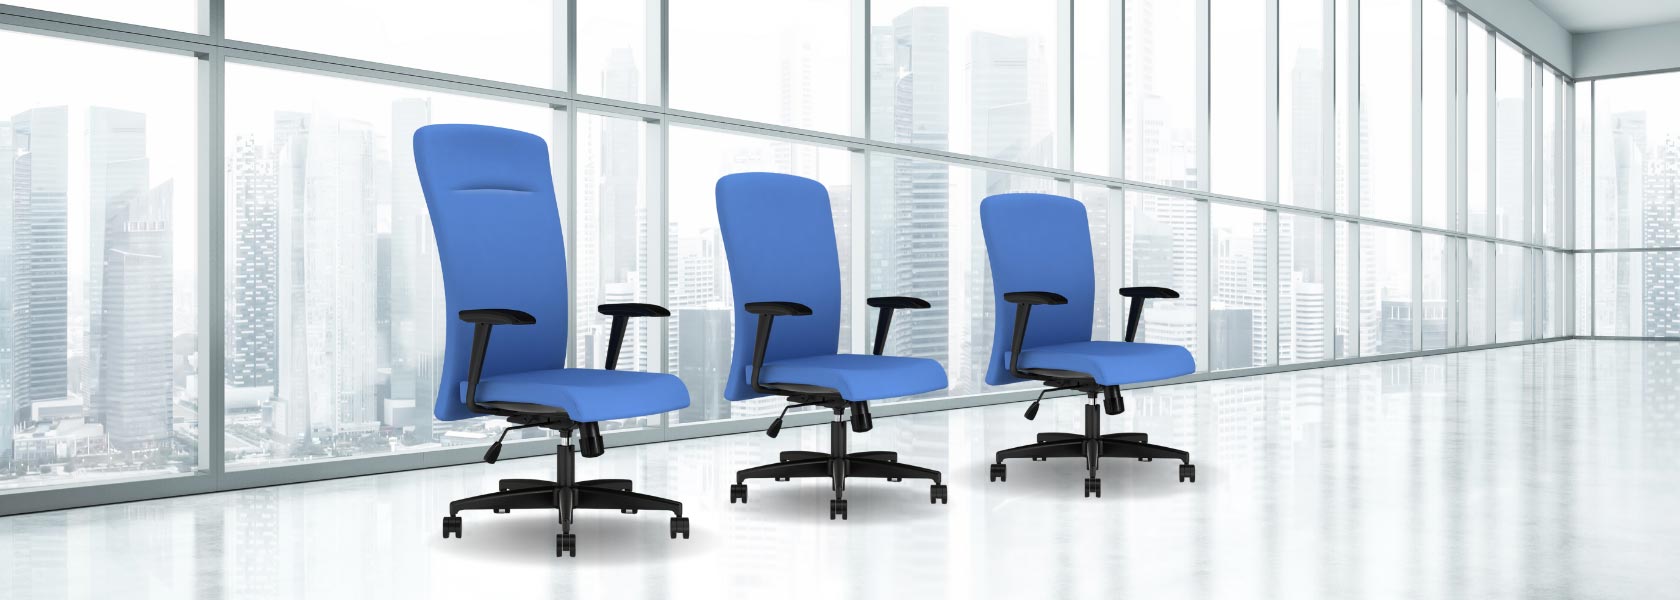 merlin chairs in blue fabrics on an office floor